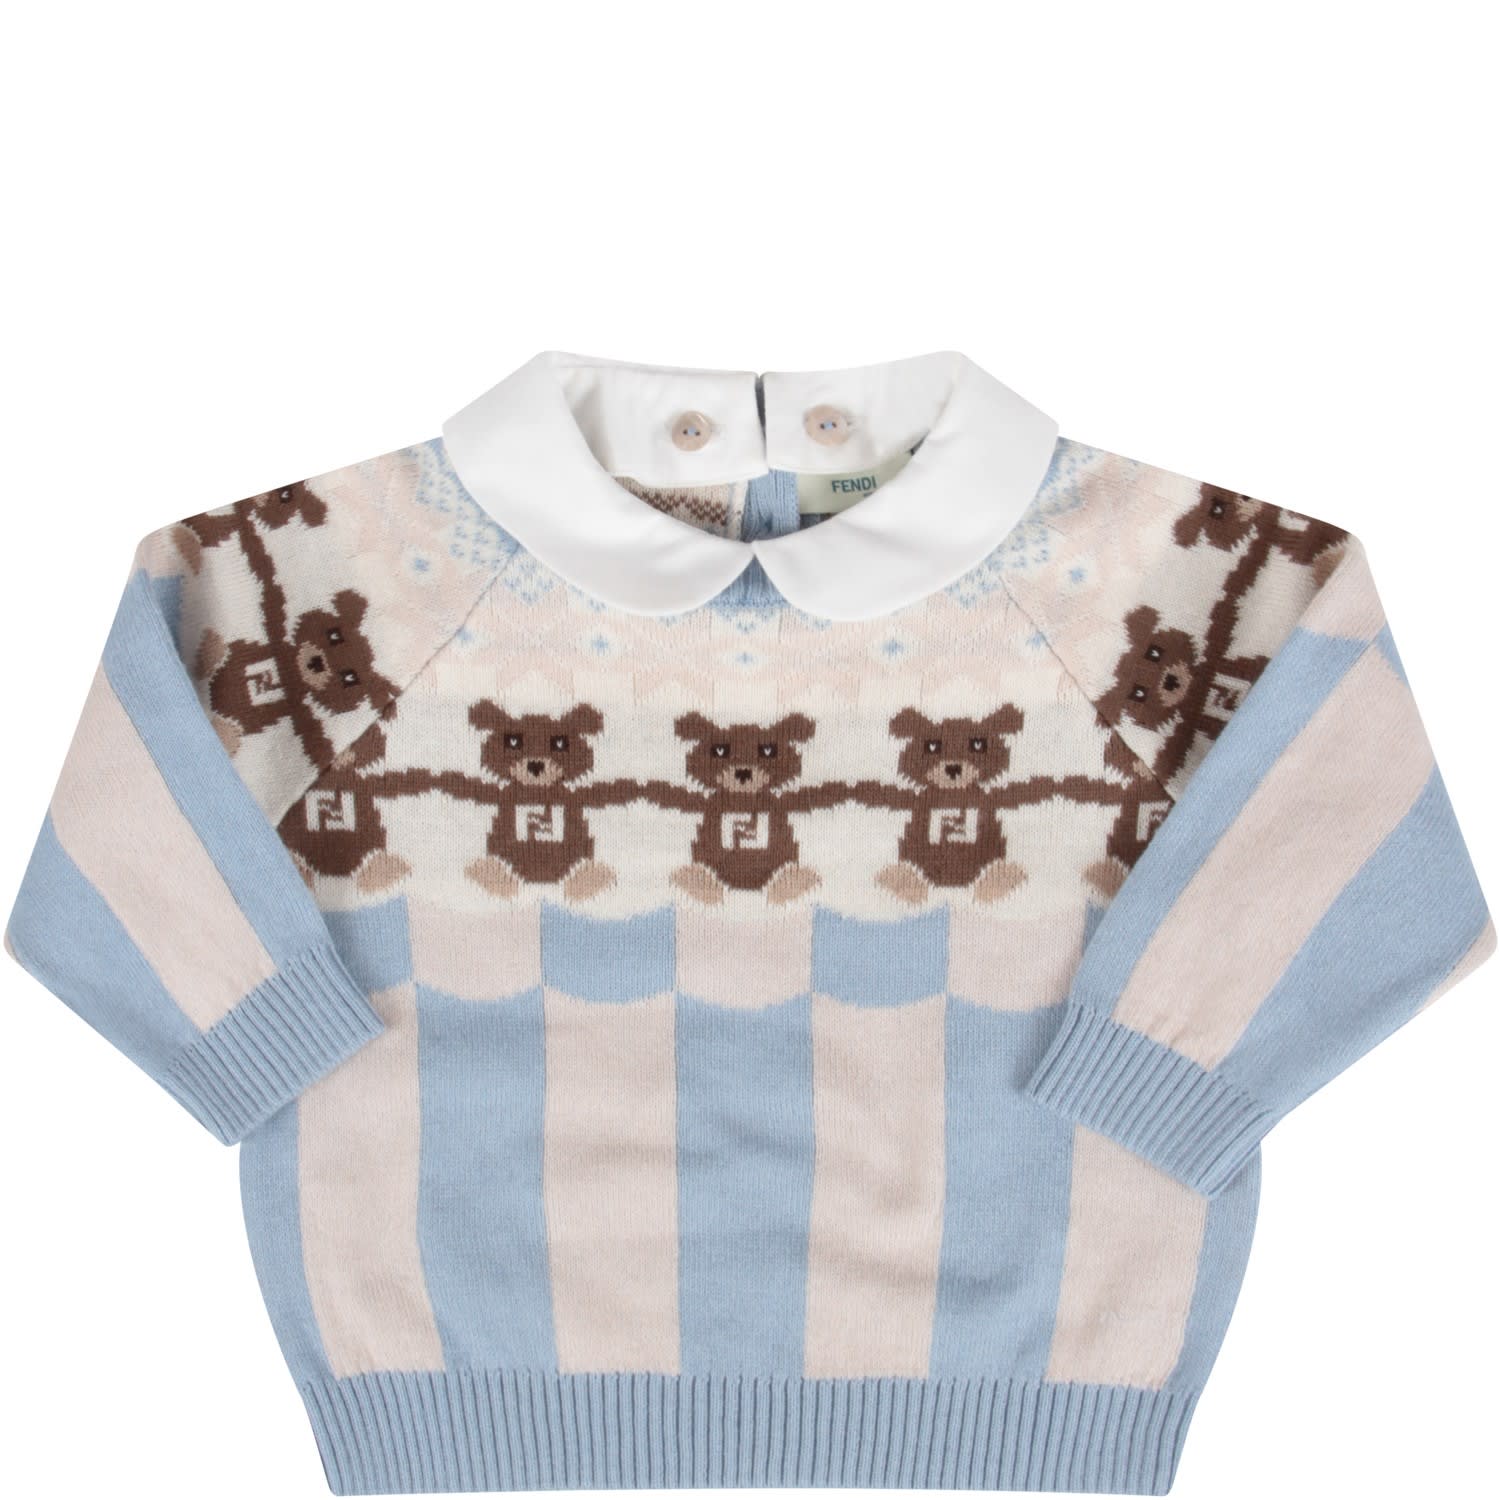 Fendi Light Blue And Beige Sweater With Bears For Baby Boy In Azzurro